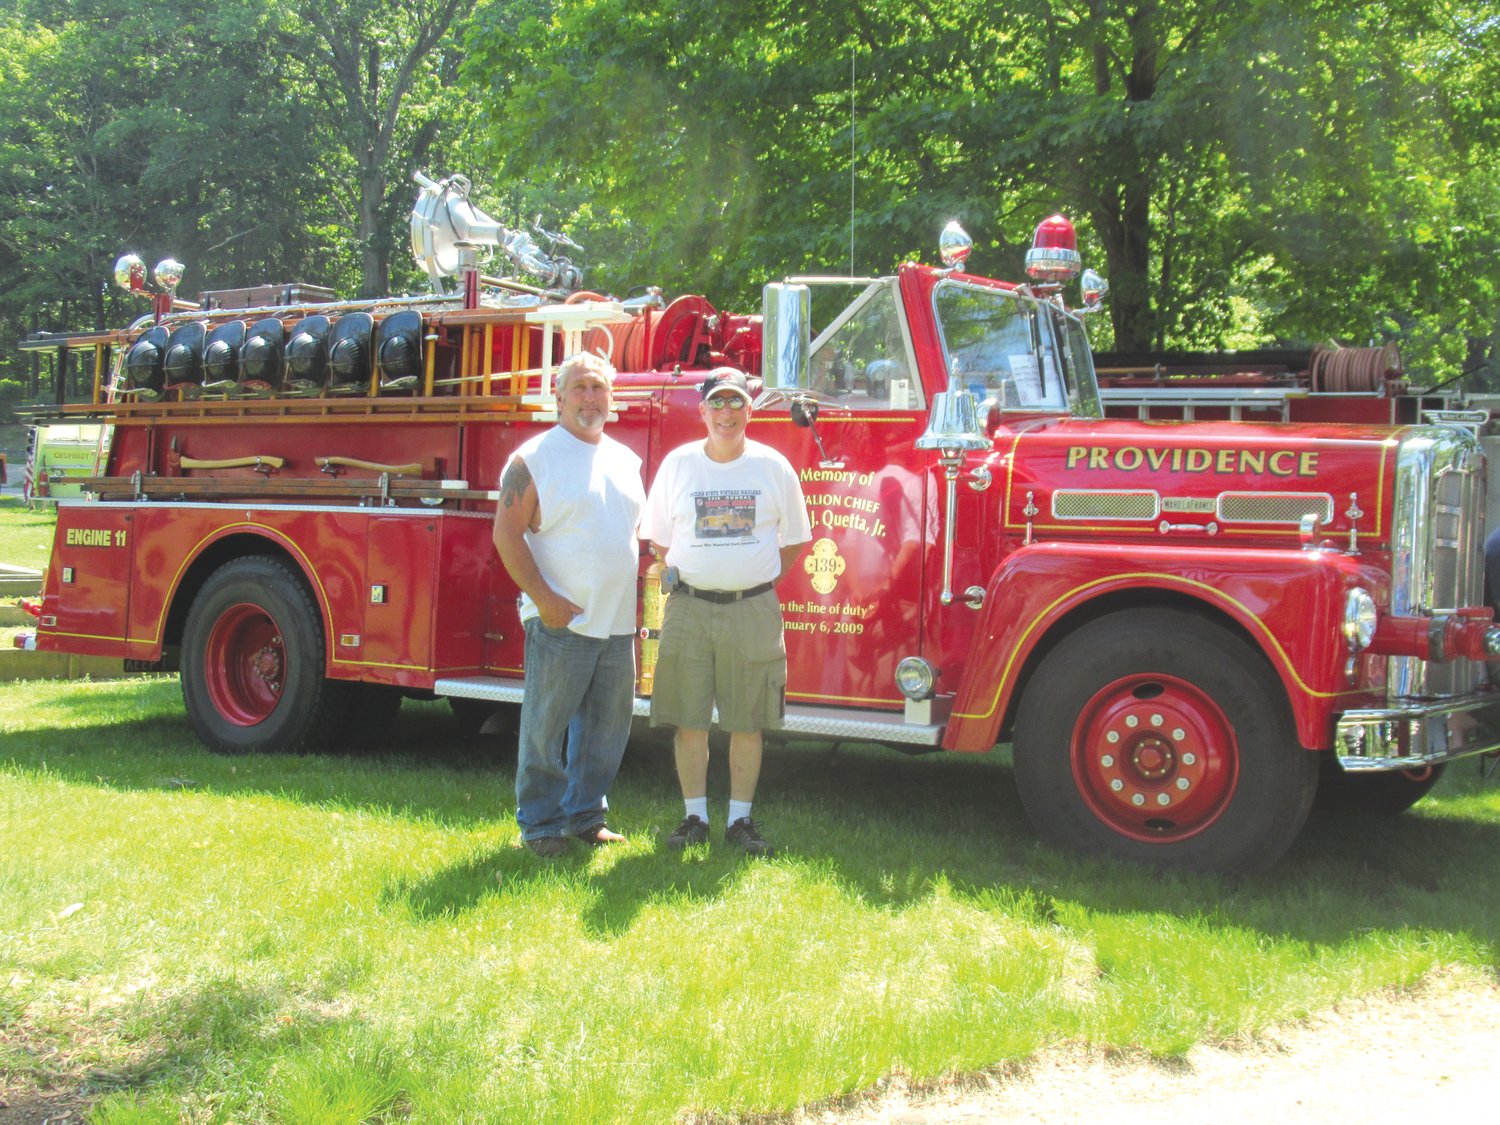 SPECIAL SHOWPIECE: Richard Quetta, who owns this restored 1957 Ward LaFrance antique truck that serves as a memorial to his late brother Frank J. Quetta Jr., is joined by Ocean State Vintage Haulers President Joe Pingitore while discussing plans for Sunday’s unique show in Warwick.